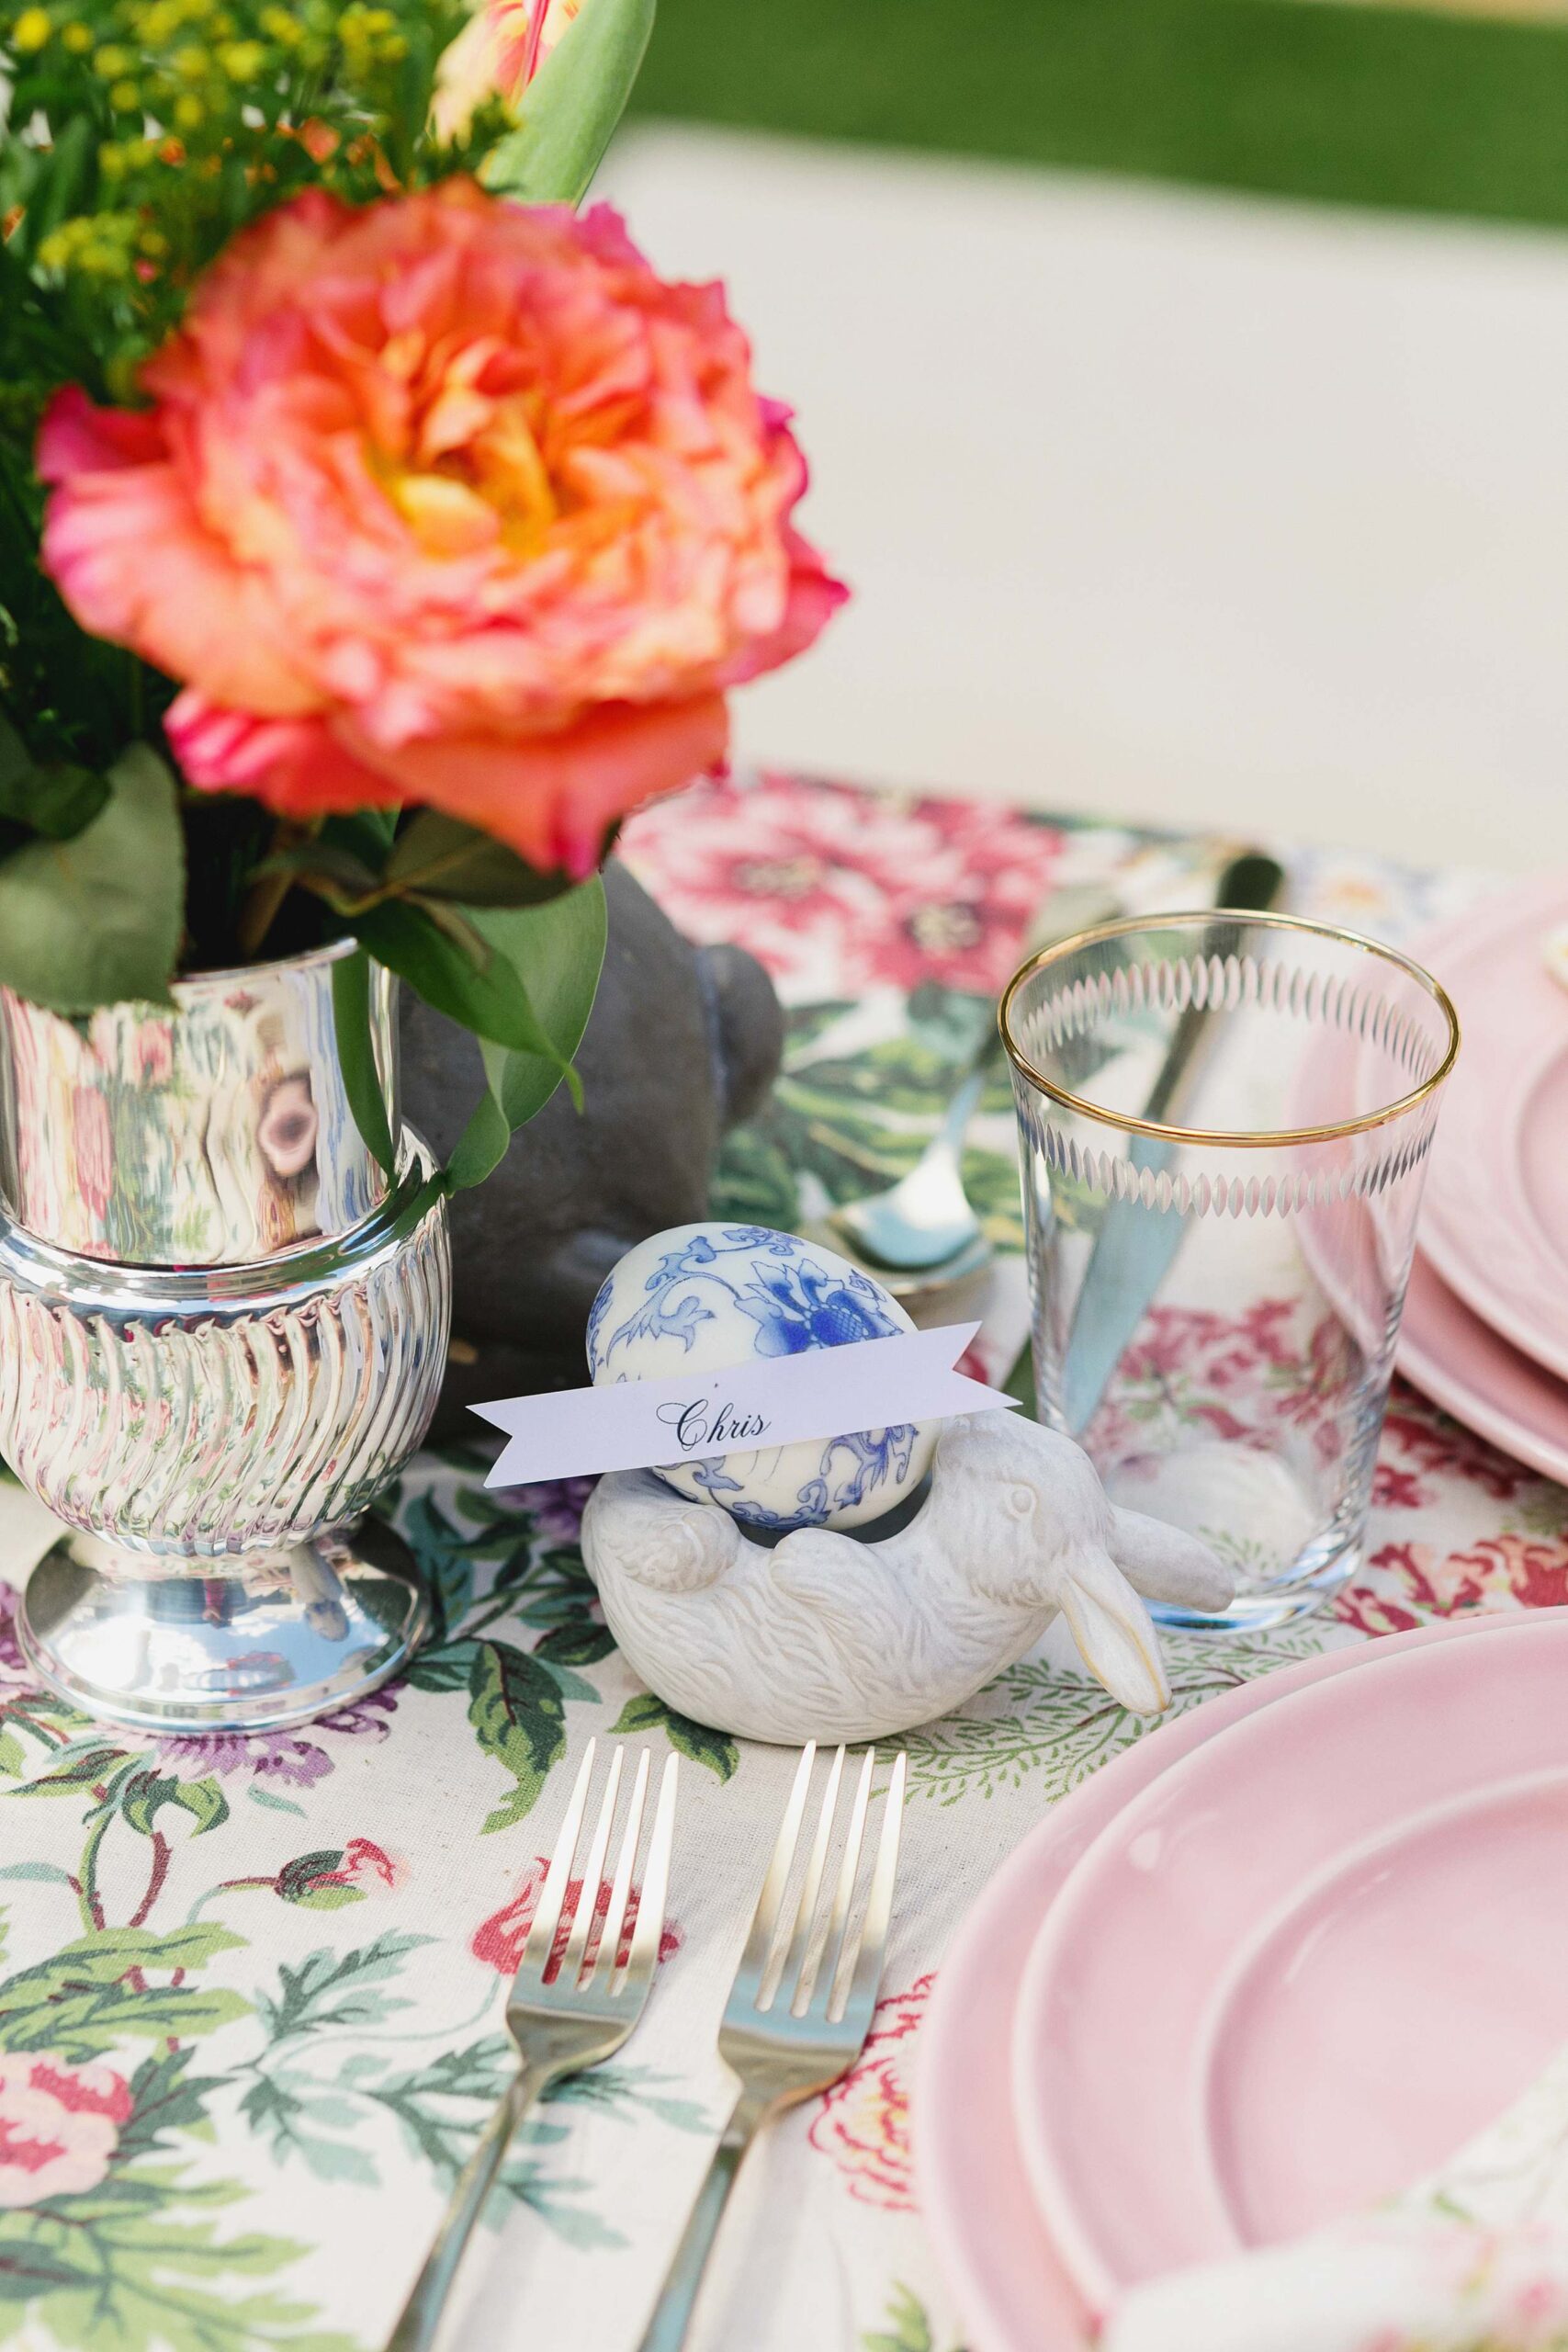 easter spring table garden party tablescape tablesetting ideas Diana Elizabeth Steffen with Pottery Barn name setting place cards idea